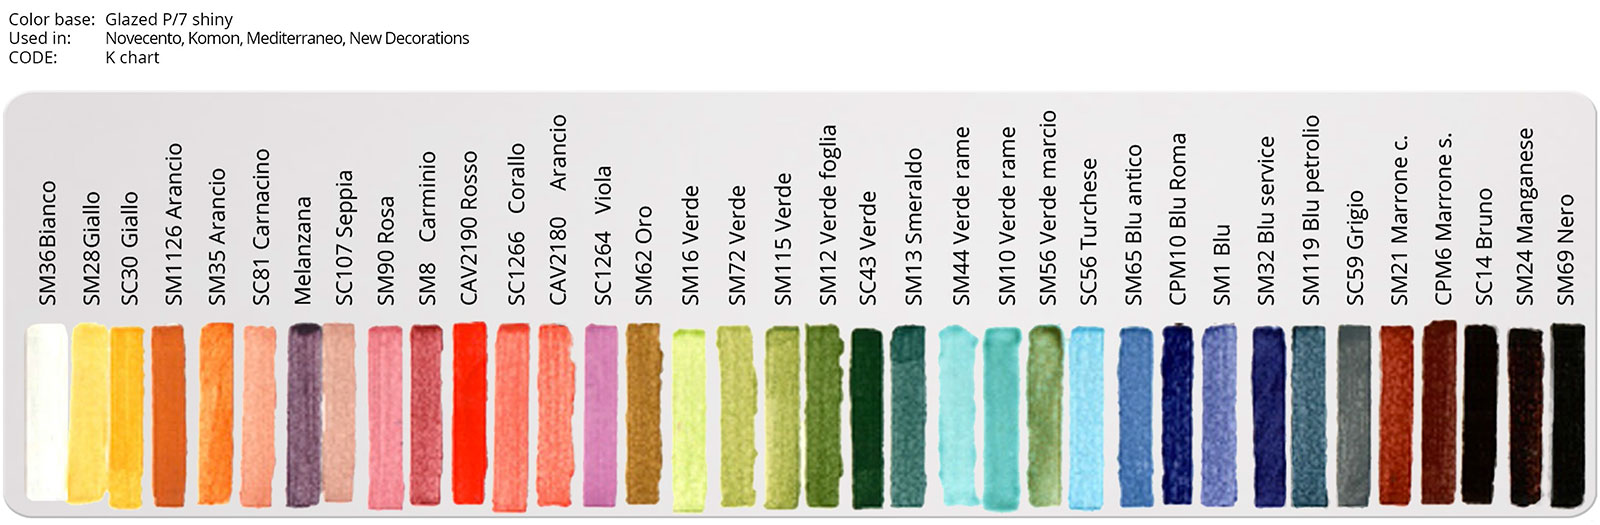 Color chart for pattern colors, realized on P7 bottom colorBottom color reference is the Panorama series